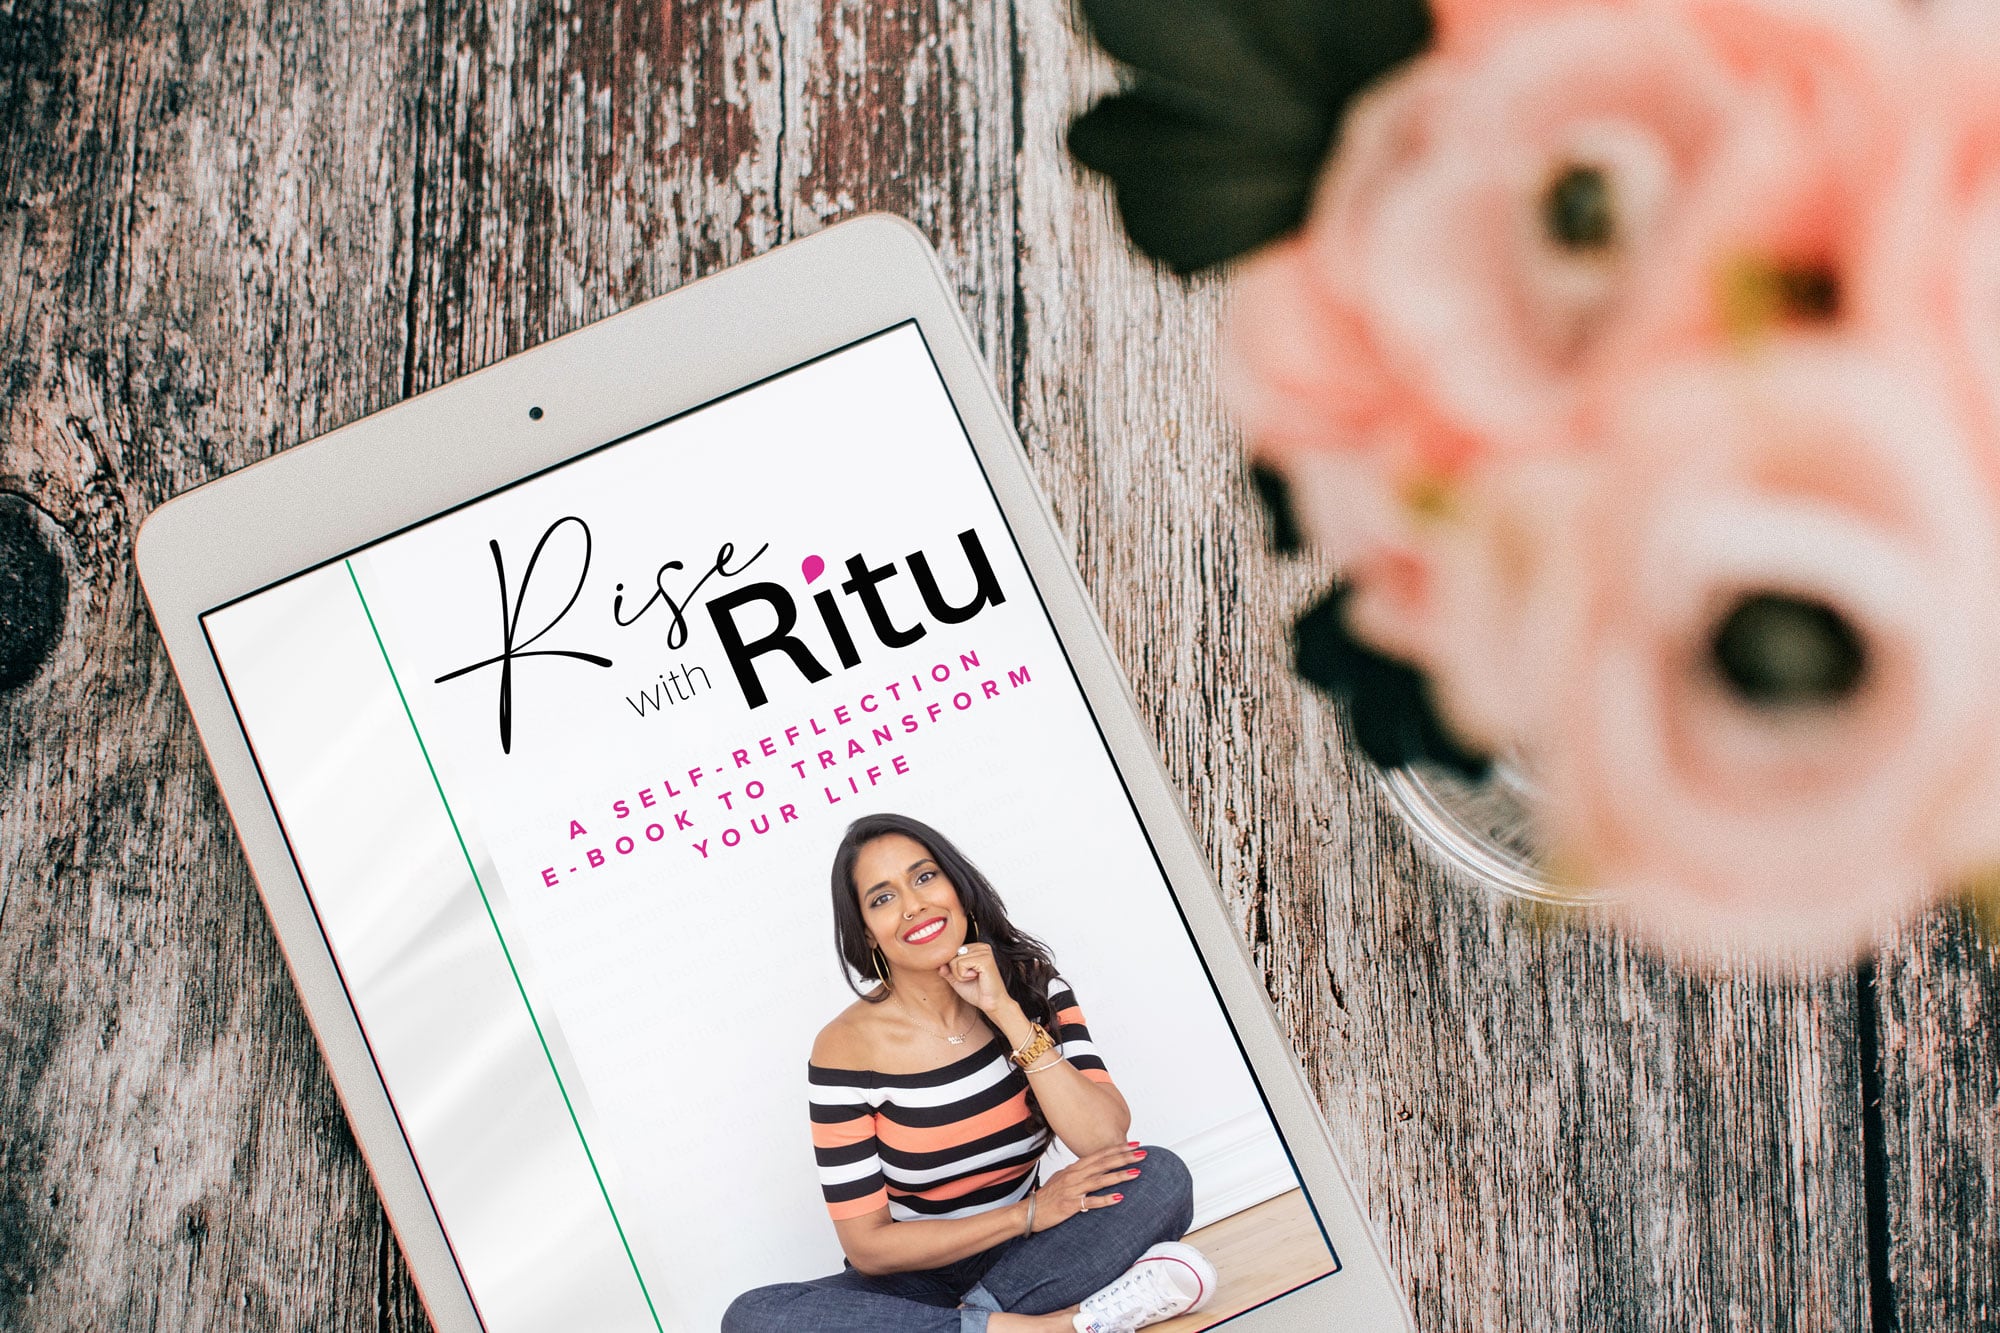 White tablet with Rise with Ritu self-reflection e-book on the screen sits on a wooden table next to a vase filled with pink flowers